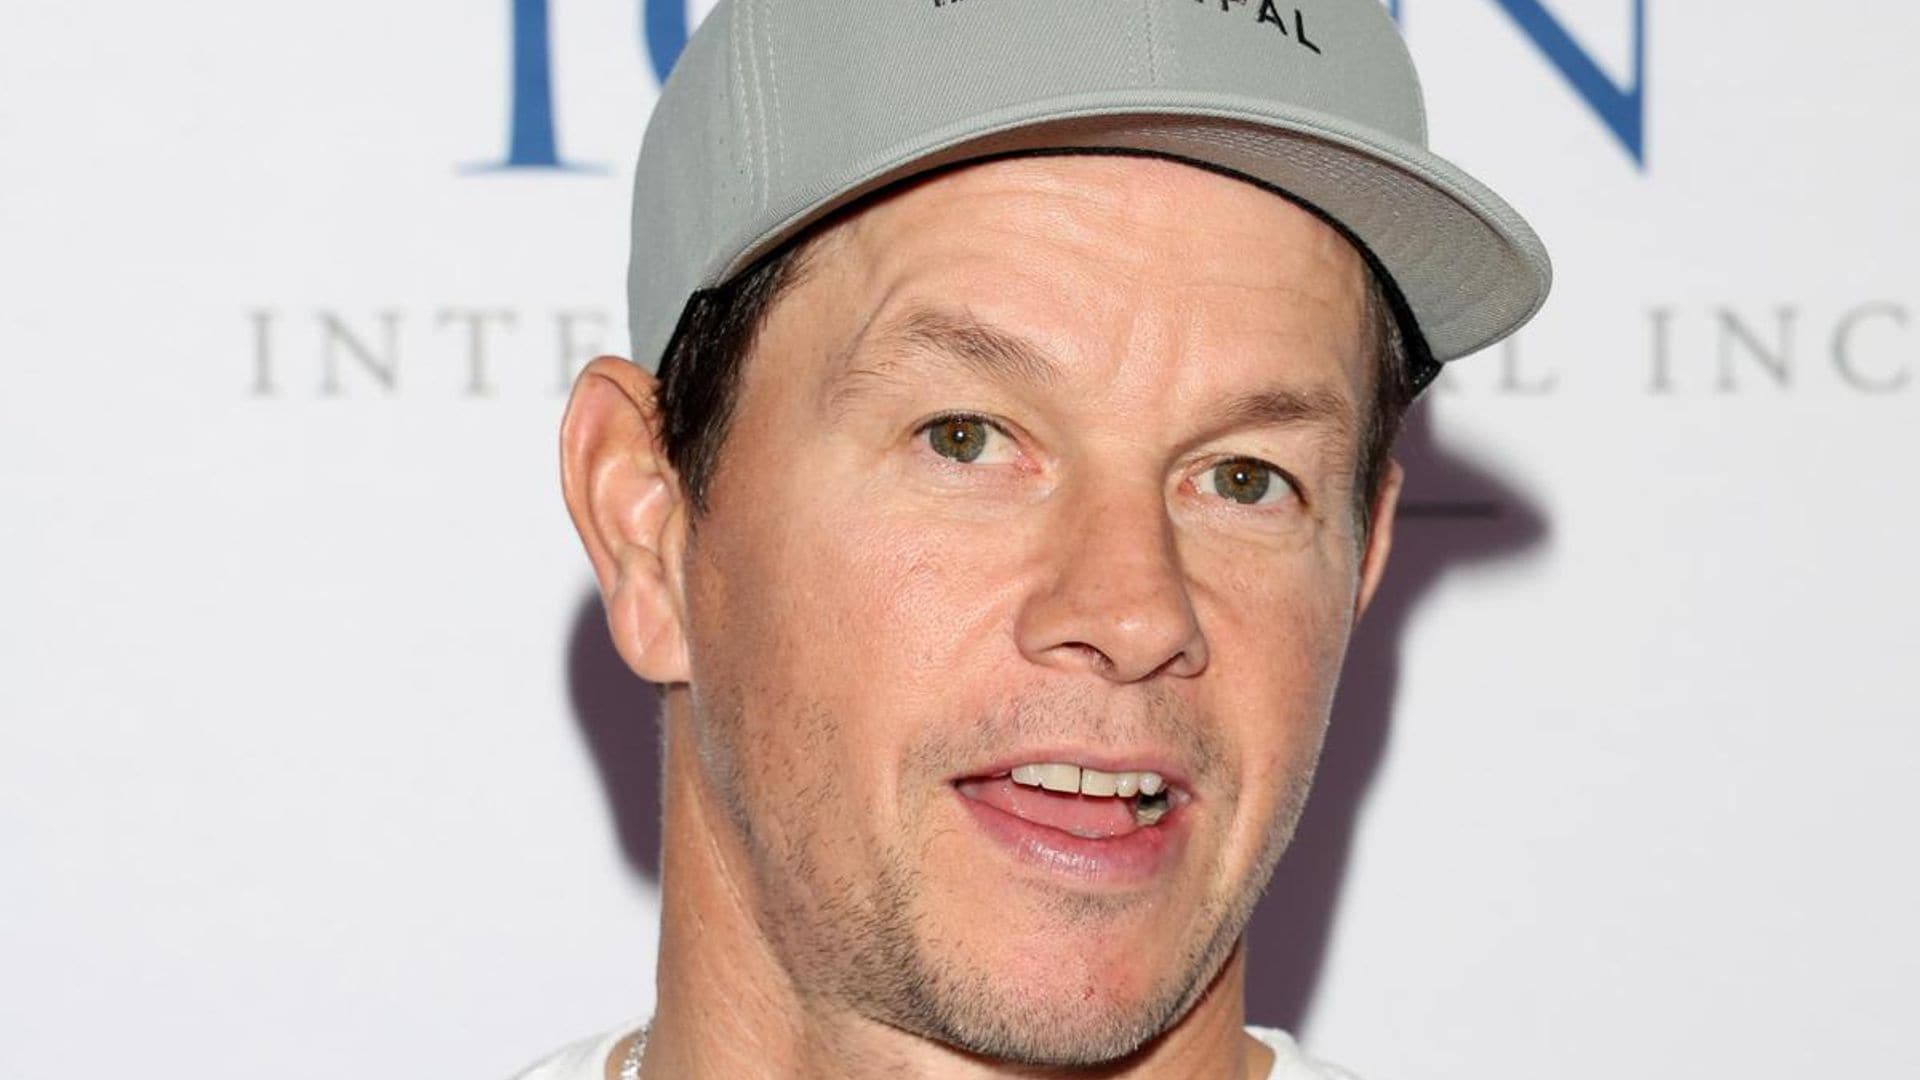 Mark Wahlberg says he’s embracing his ‘old age’ and the roles that come with it